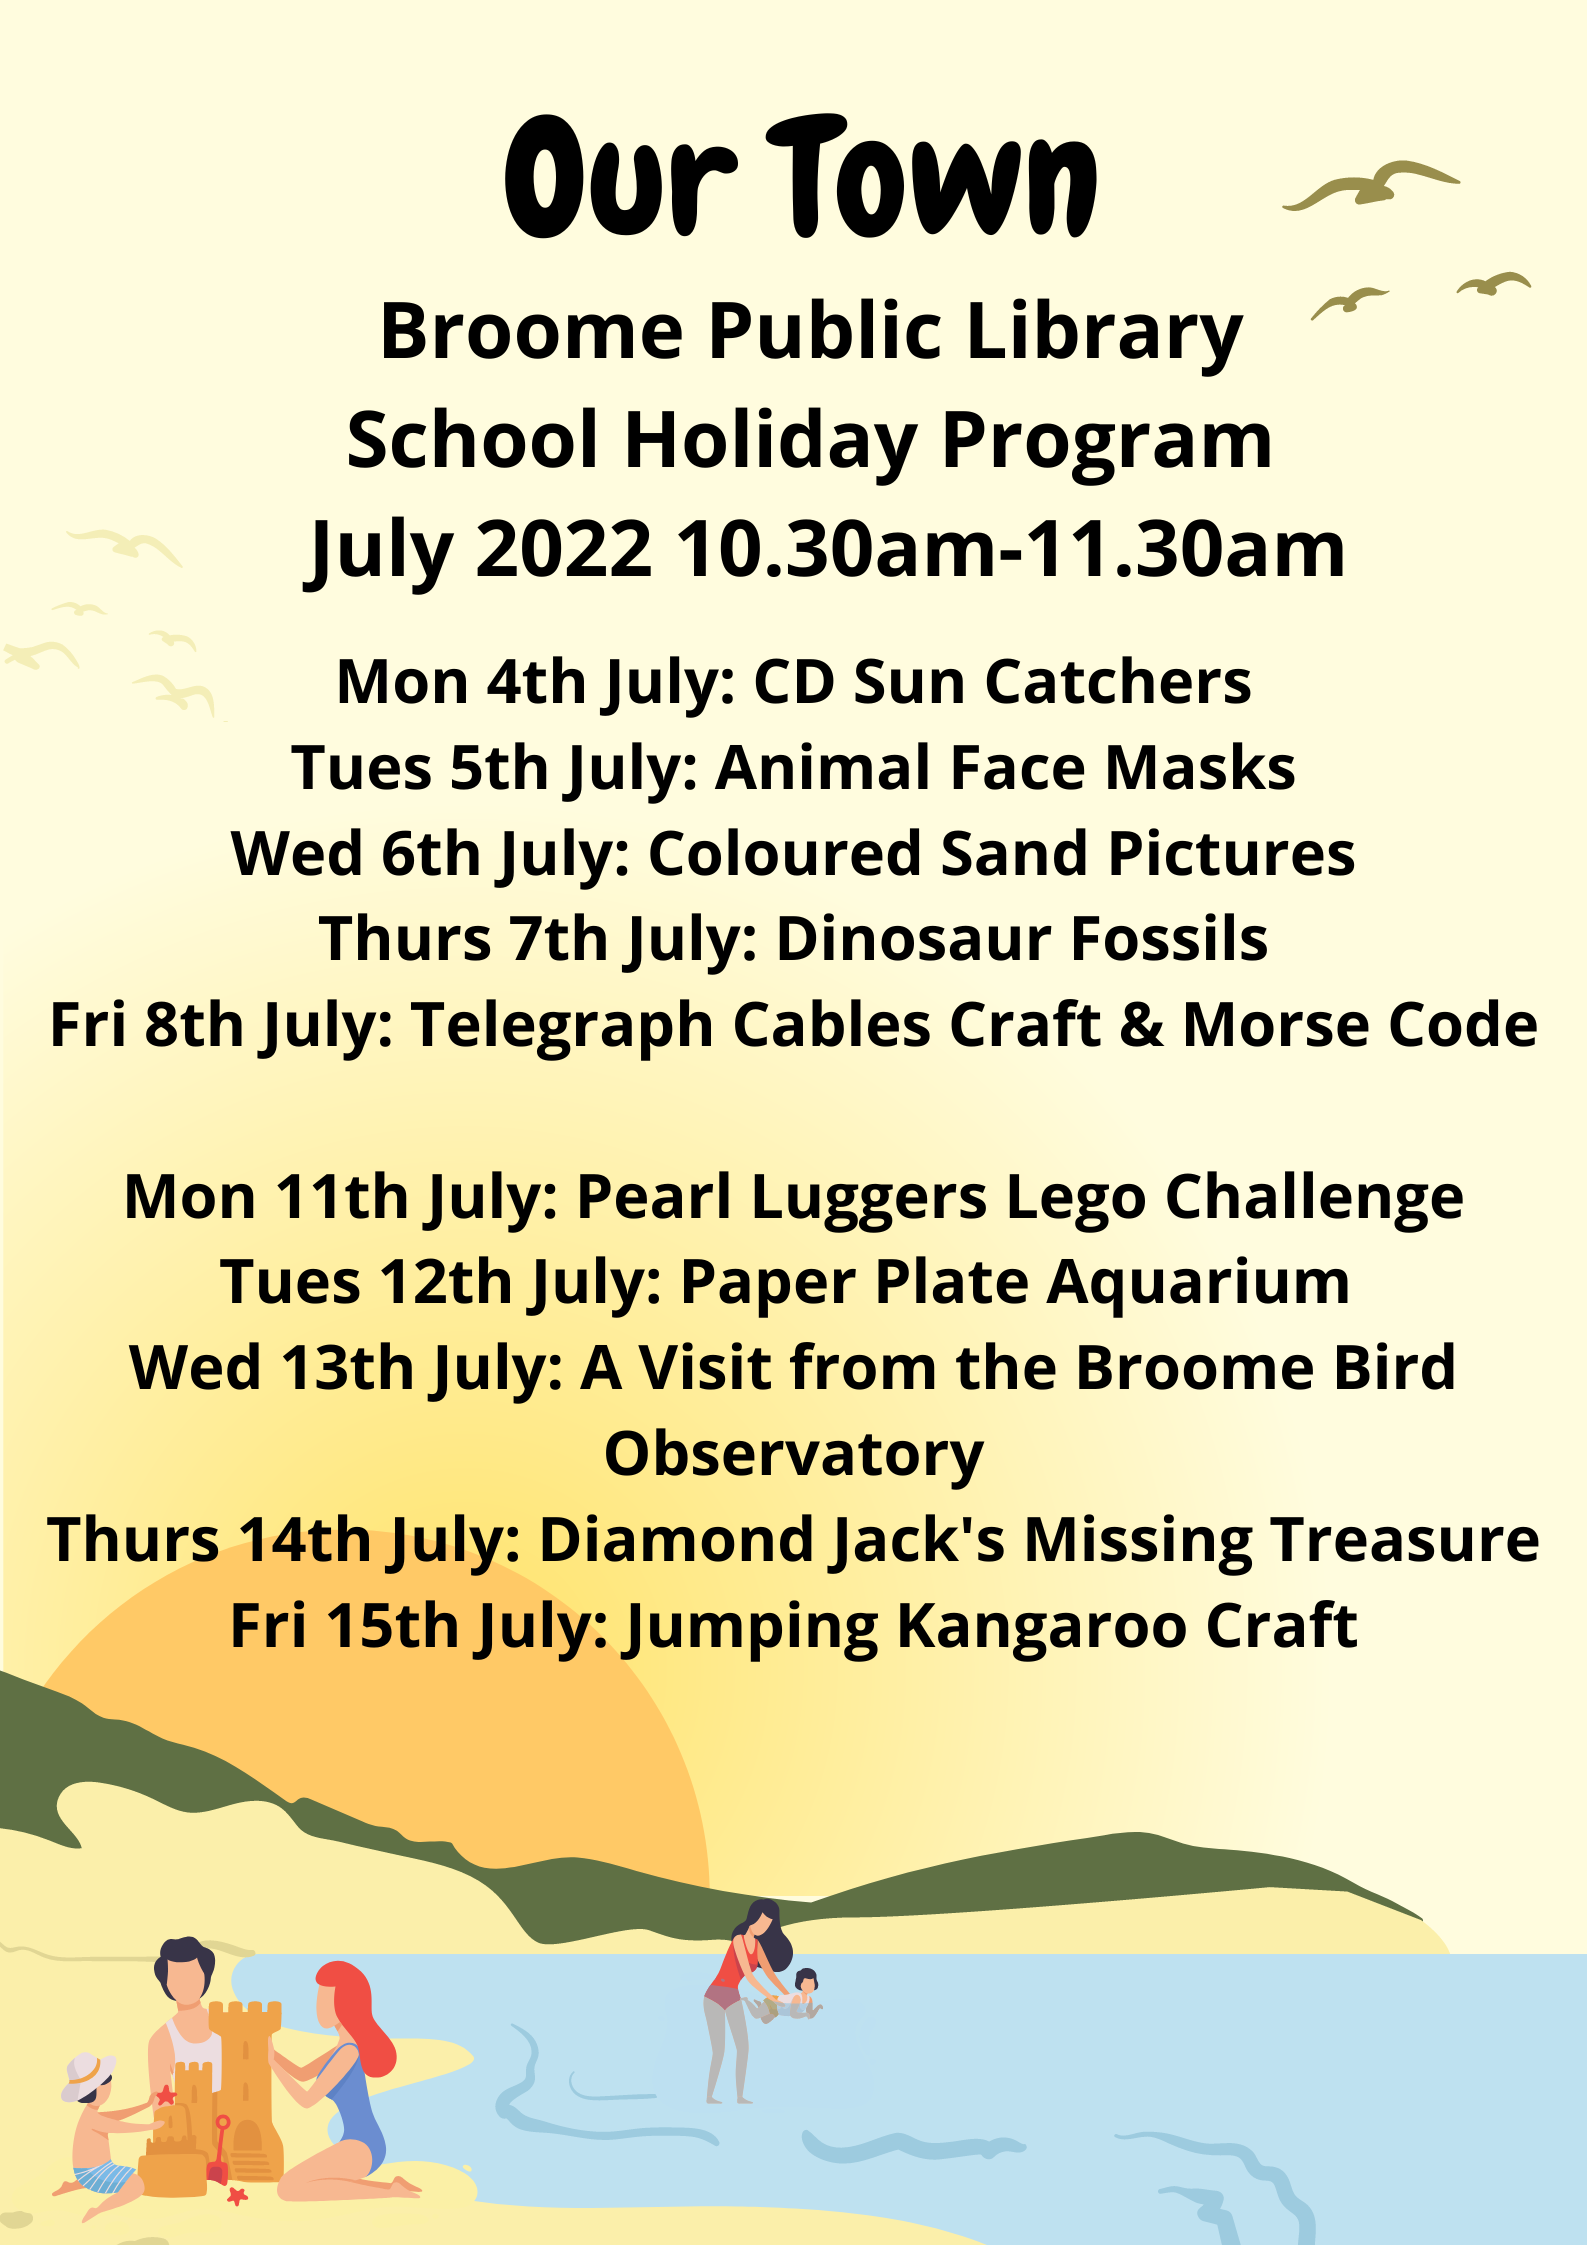 broome public library school holiday program july 2022.png